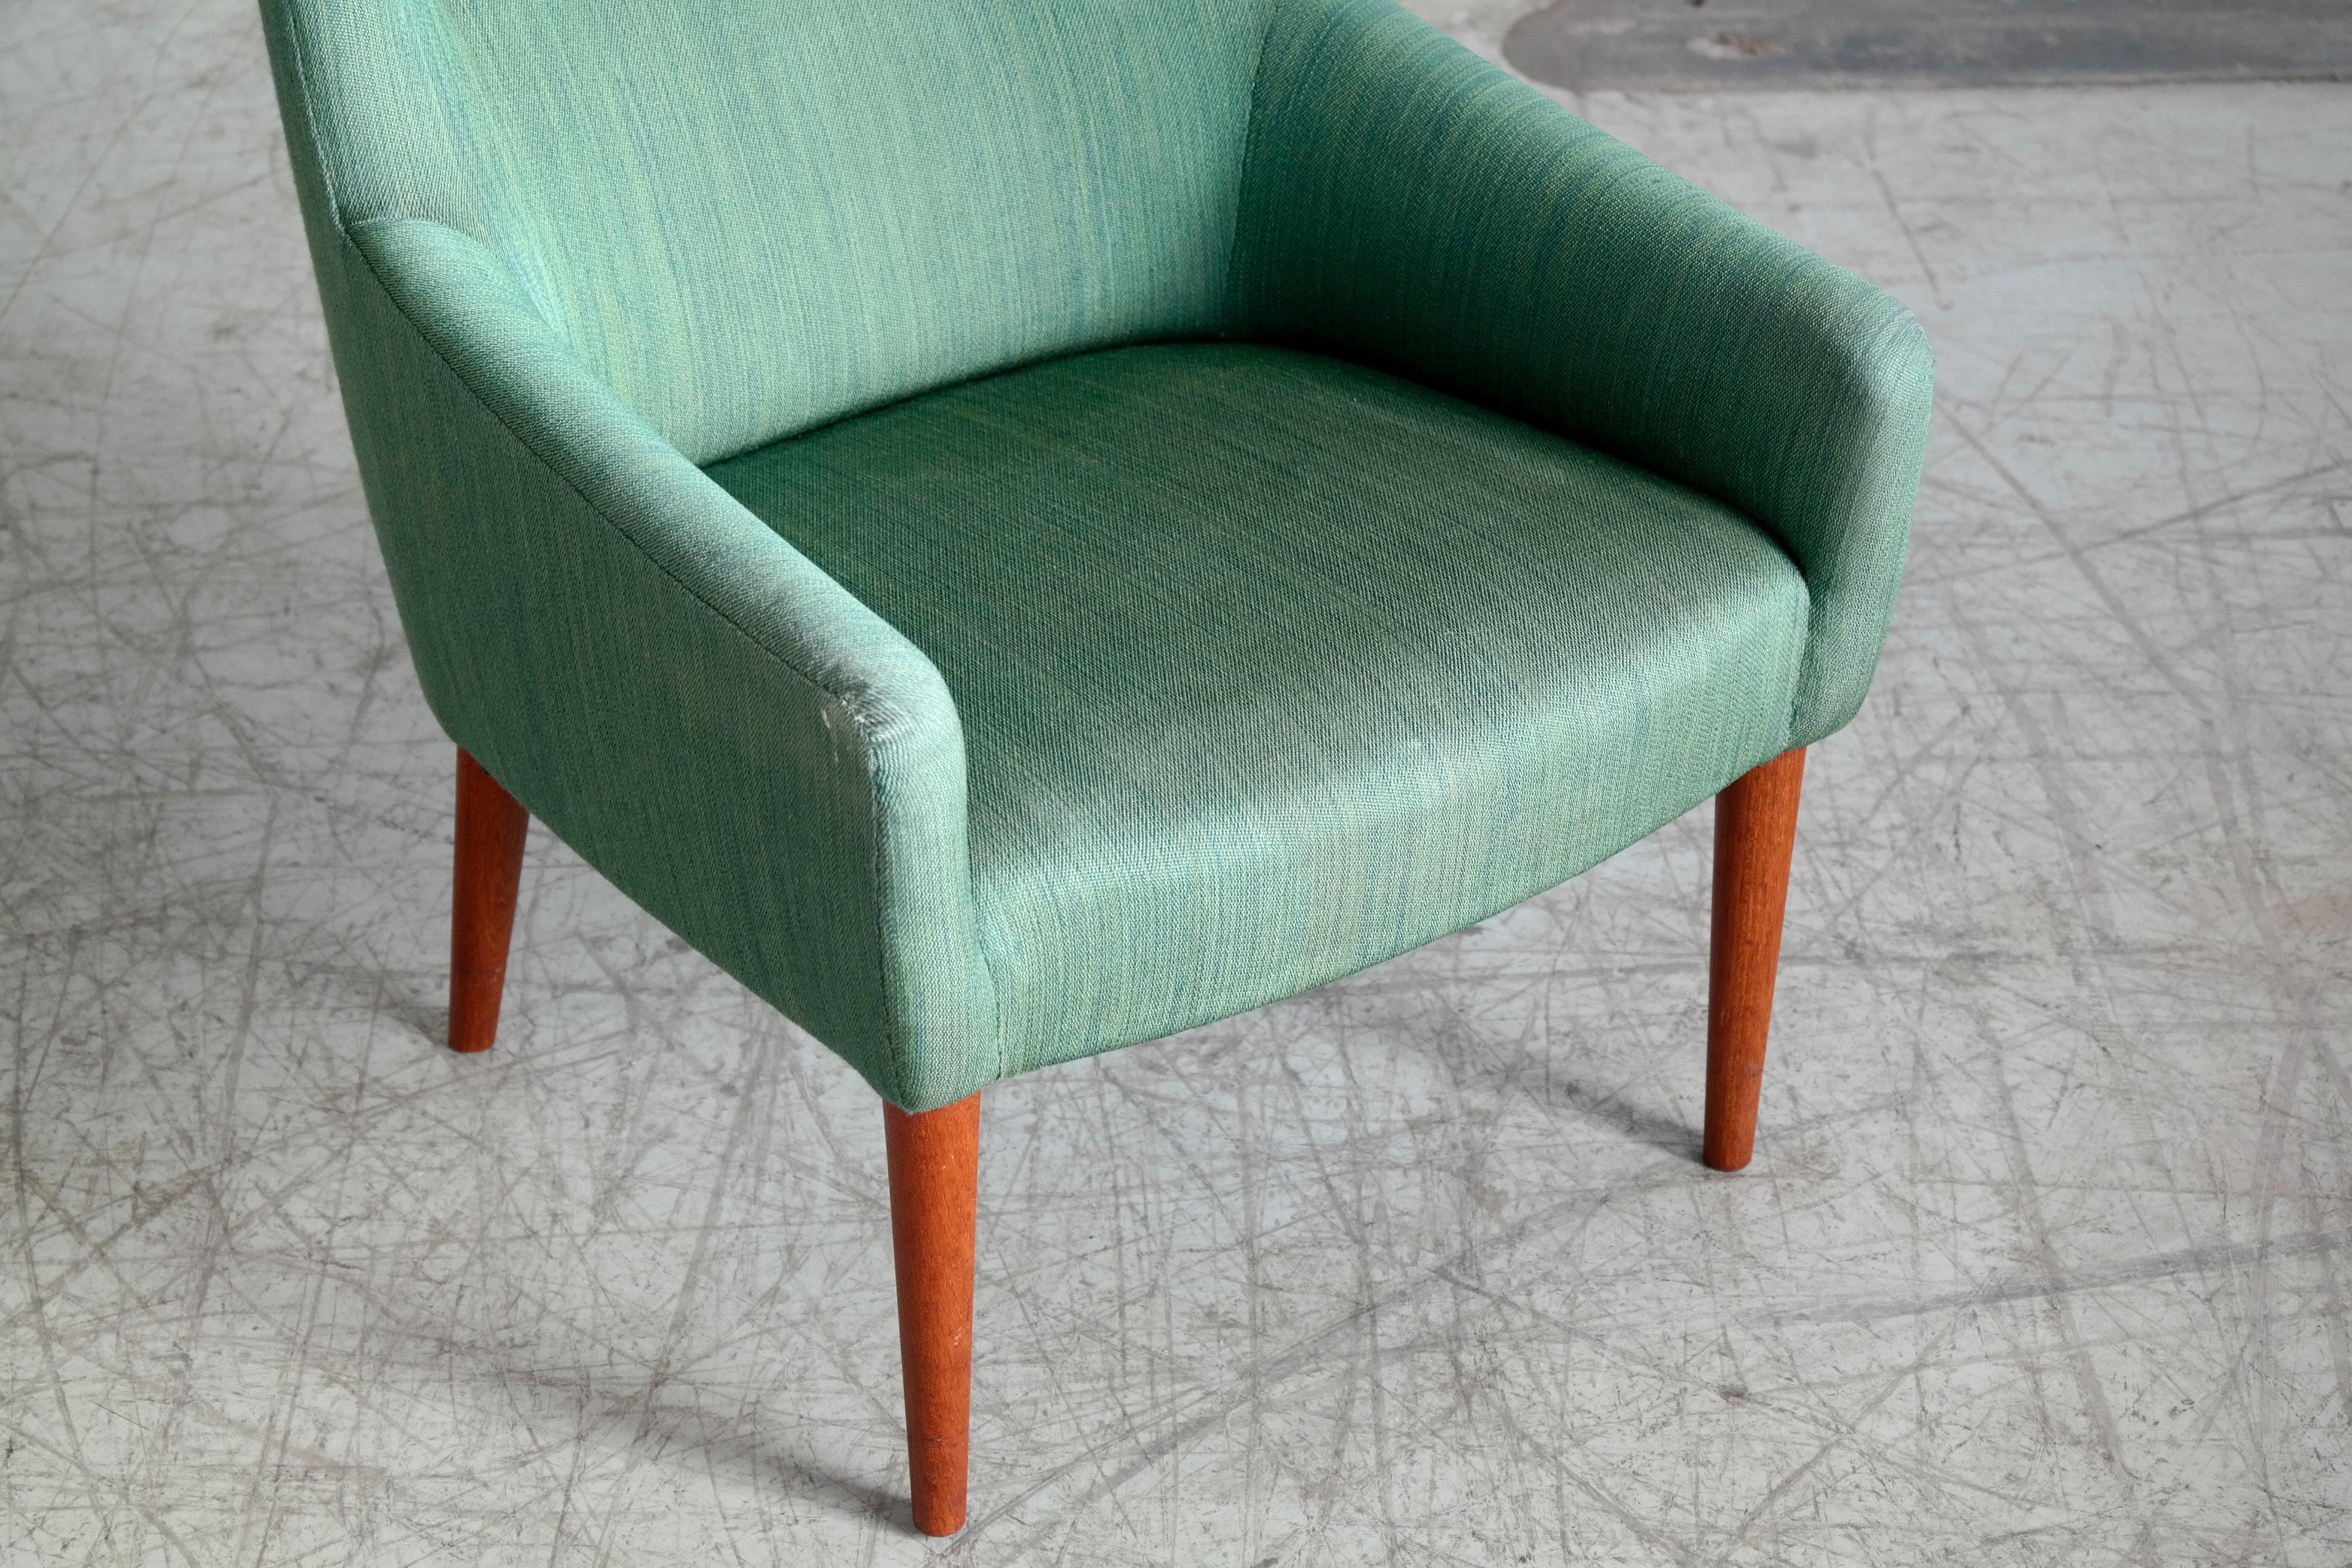 Mid-20th Century Danish 1950s Easy Chair with Footstool by Master Cabinet Maker Jacob Kjaer